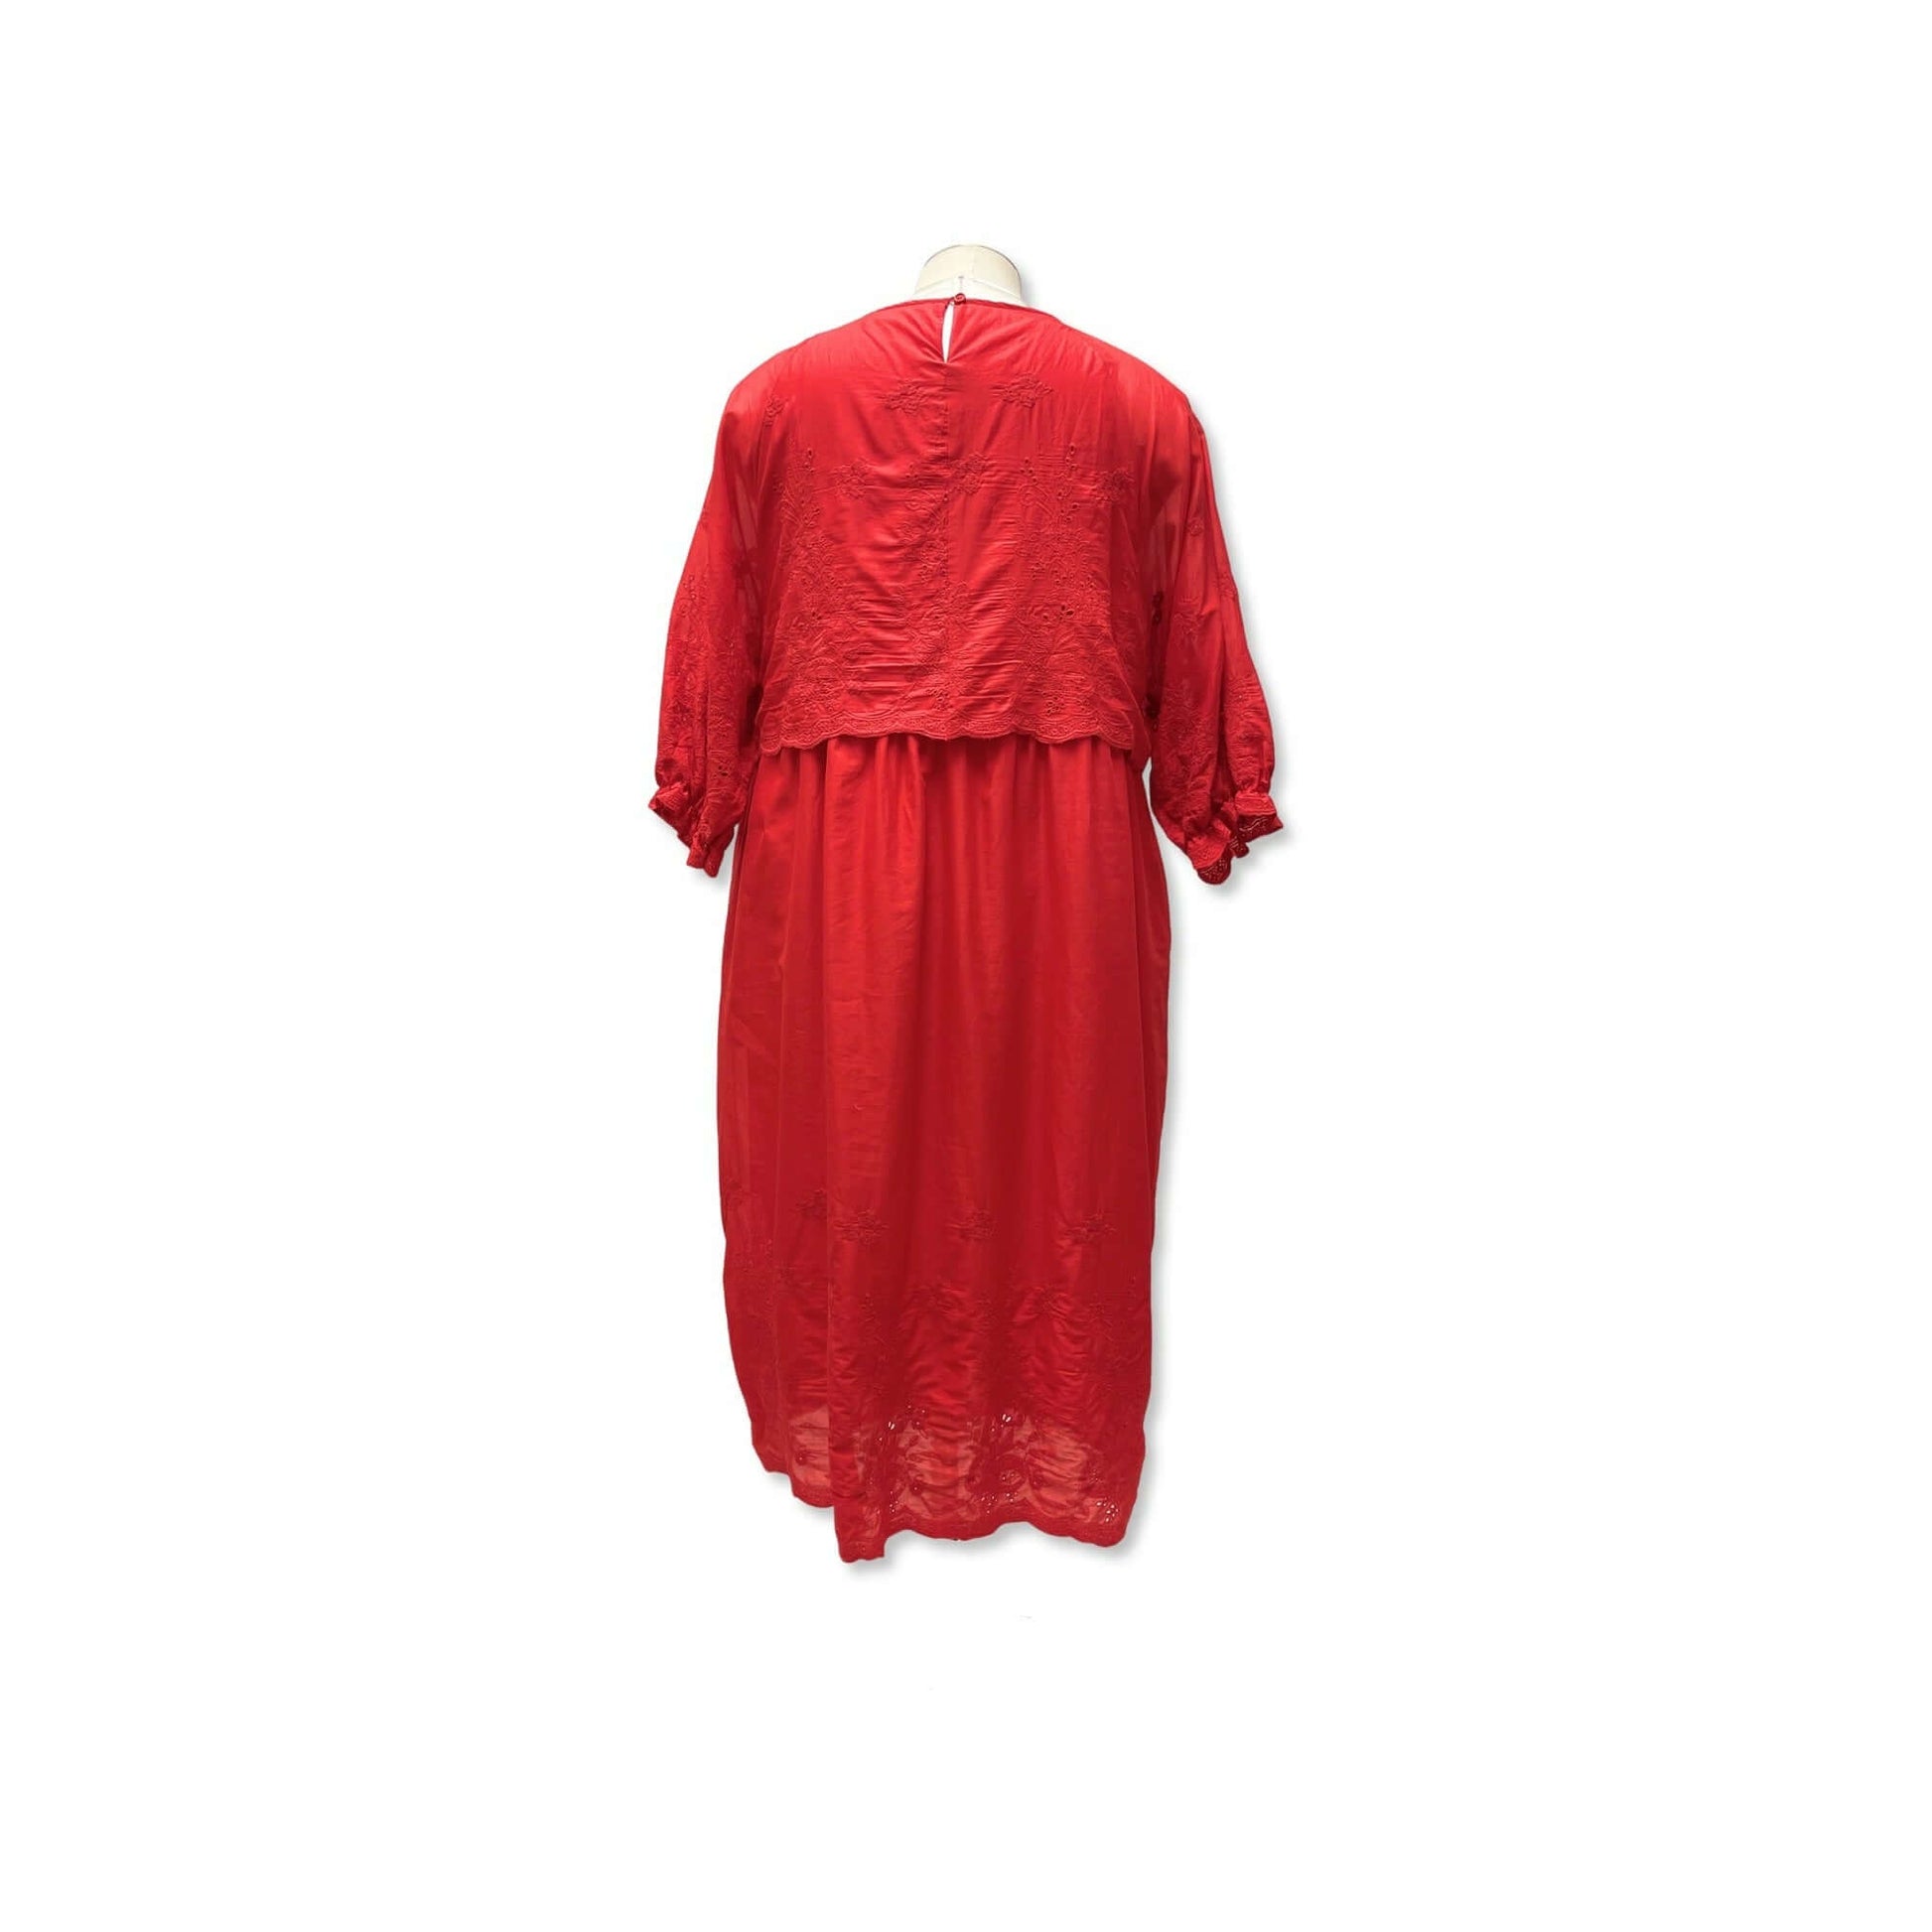 Bloom Clothing NZ,BRING ON SUMMER DRESS - Red,$289.00,